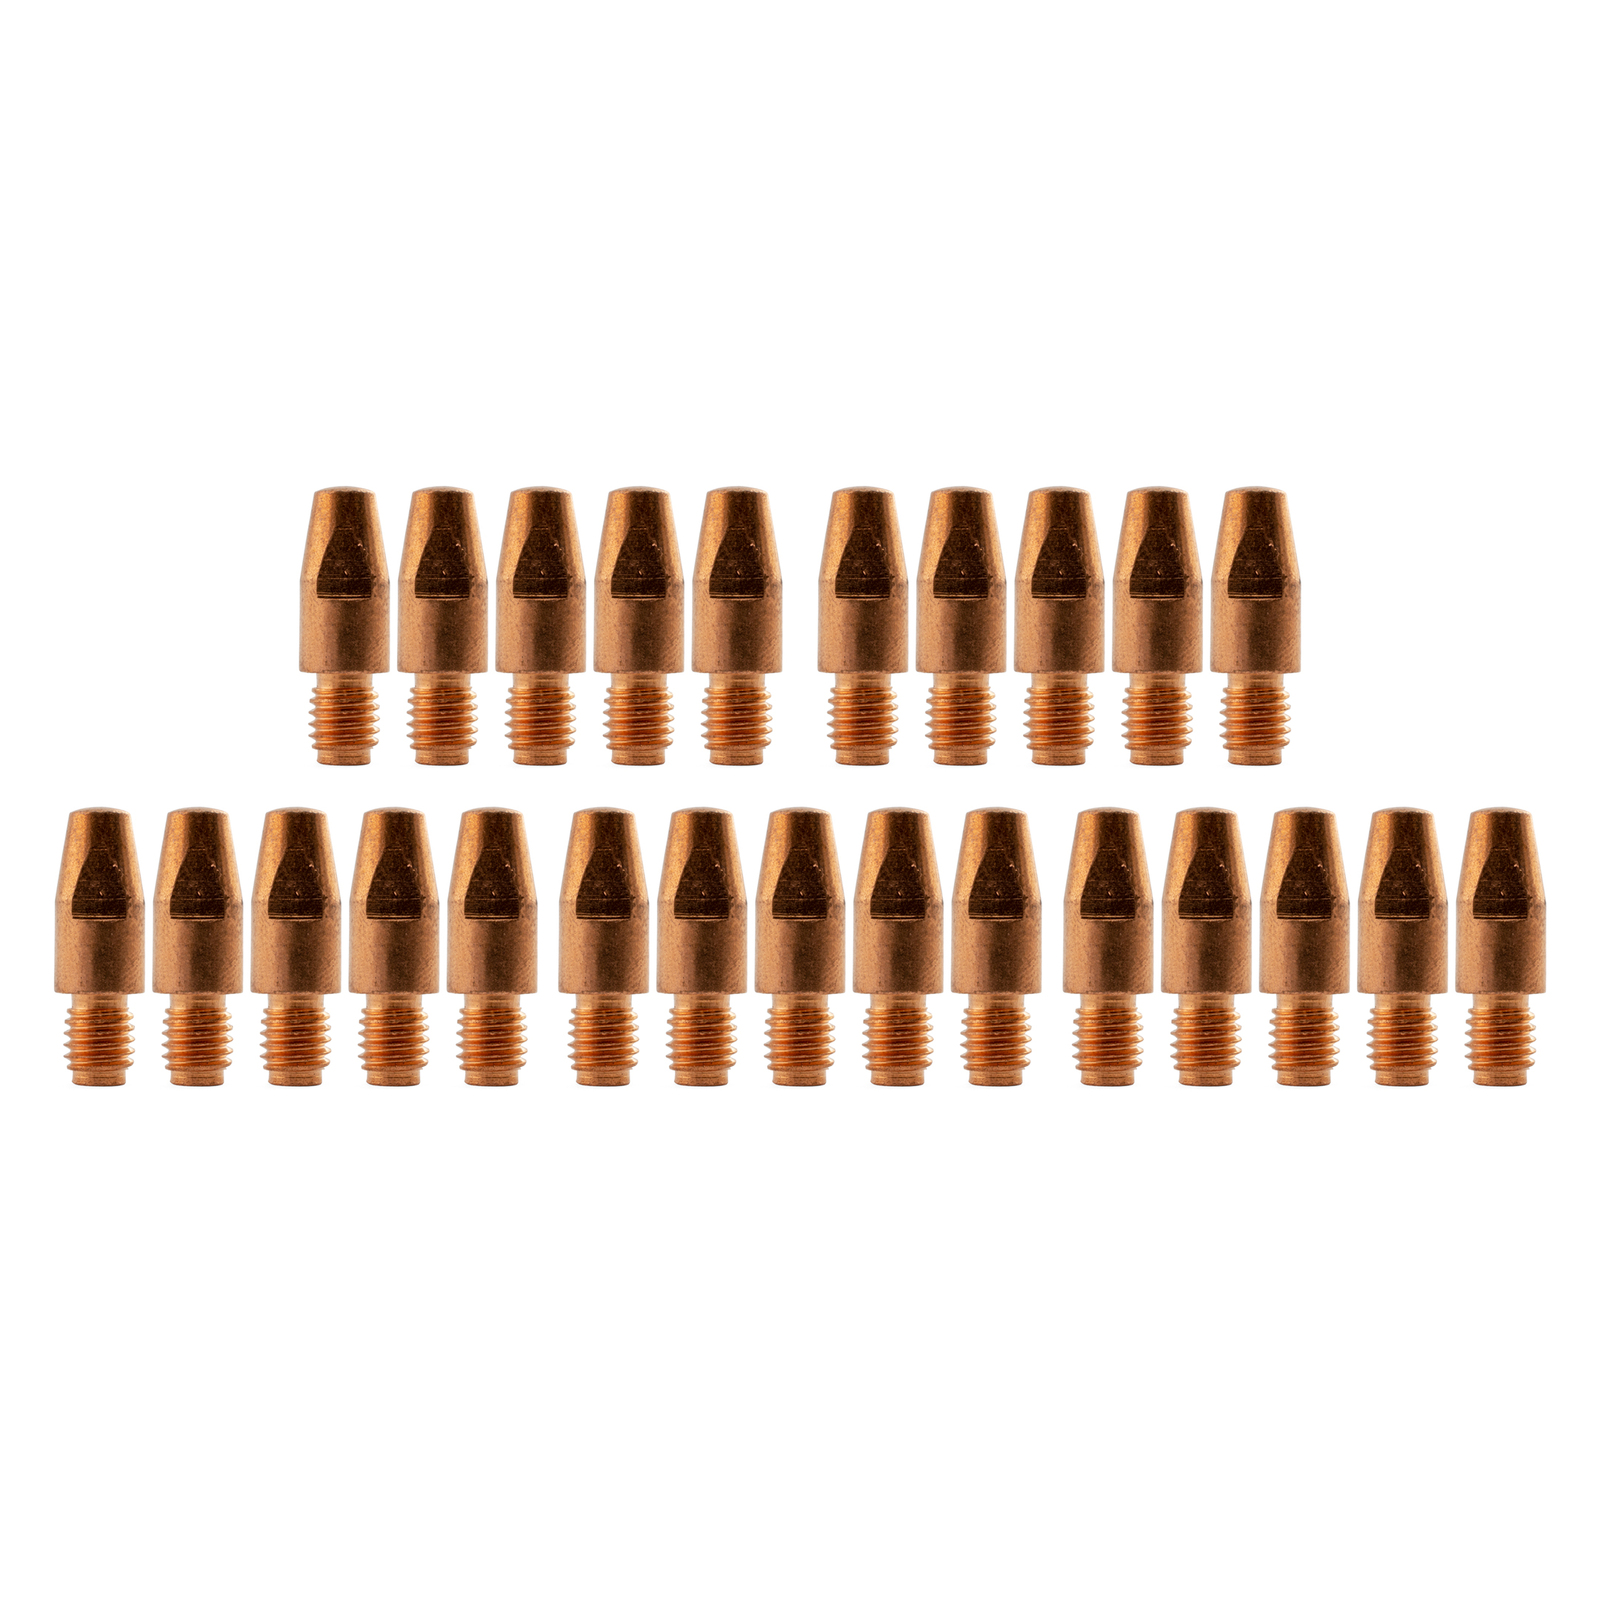 Binzel Style MIG Contact Tips 1.0mm - 25 pack - M8 x 10mm x 1.0mm